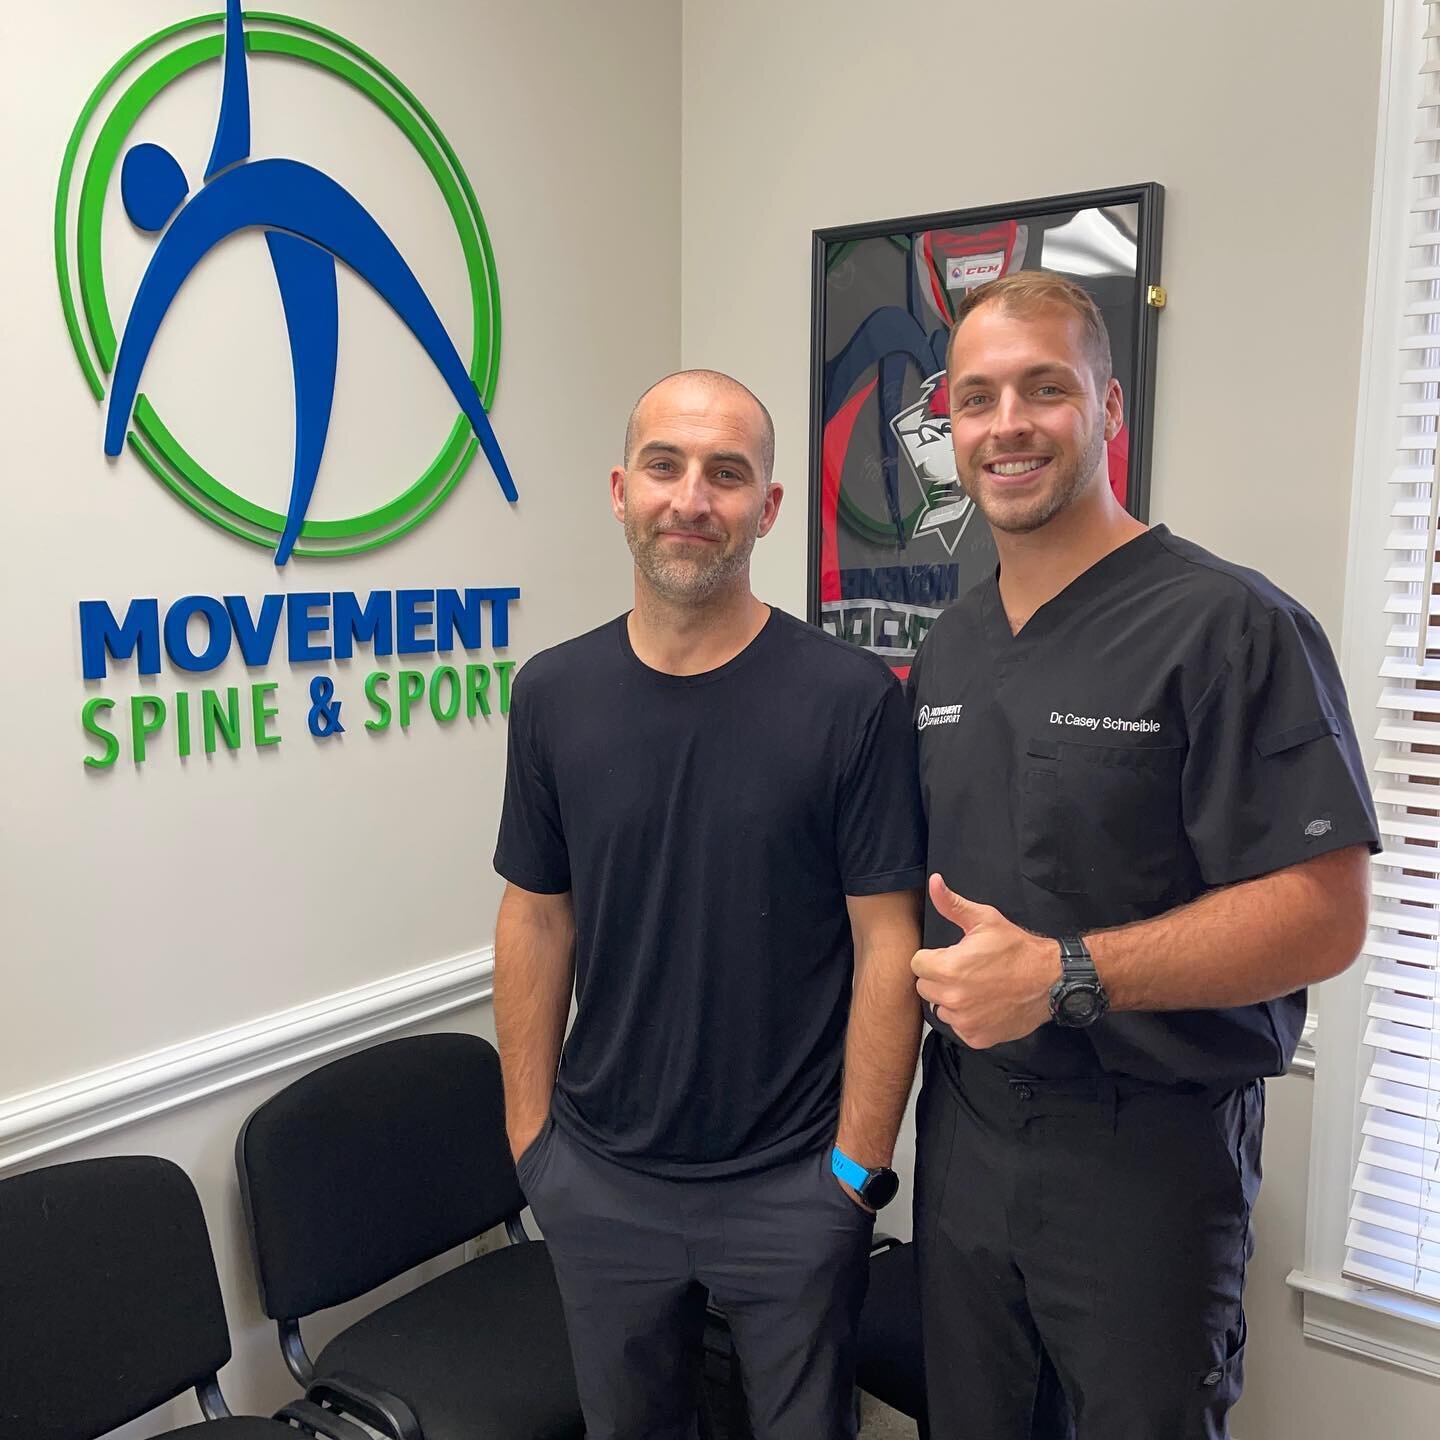 So glad to be able to help and teach so many good people! 

#movementeveryday 

#movement

#chiropractic 

If your struggling with pain, injury or just curious, visit @movementspineandsport 

We provide active people sidelined due to pain, injury or 